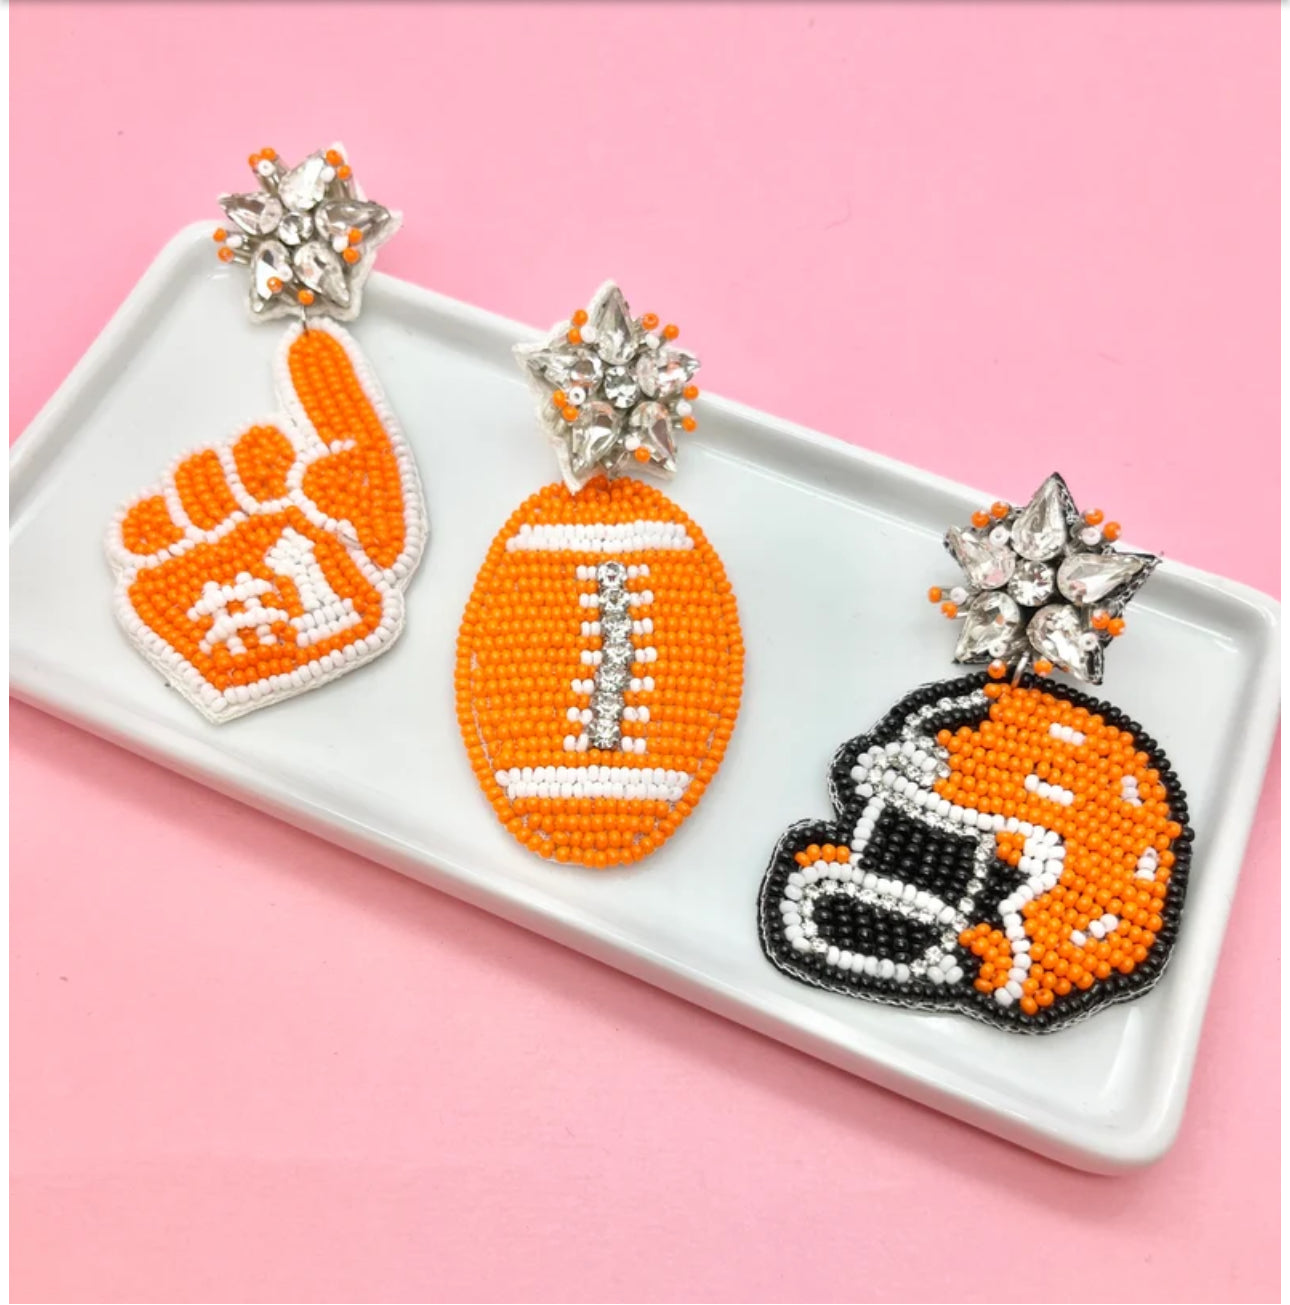 Bright Orange and White Game Day Earrings